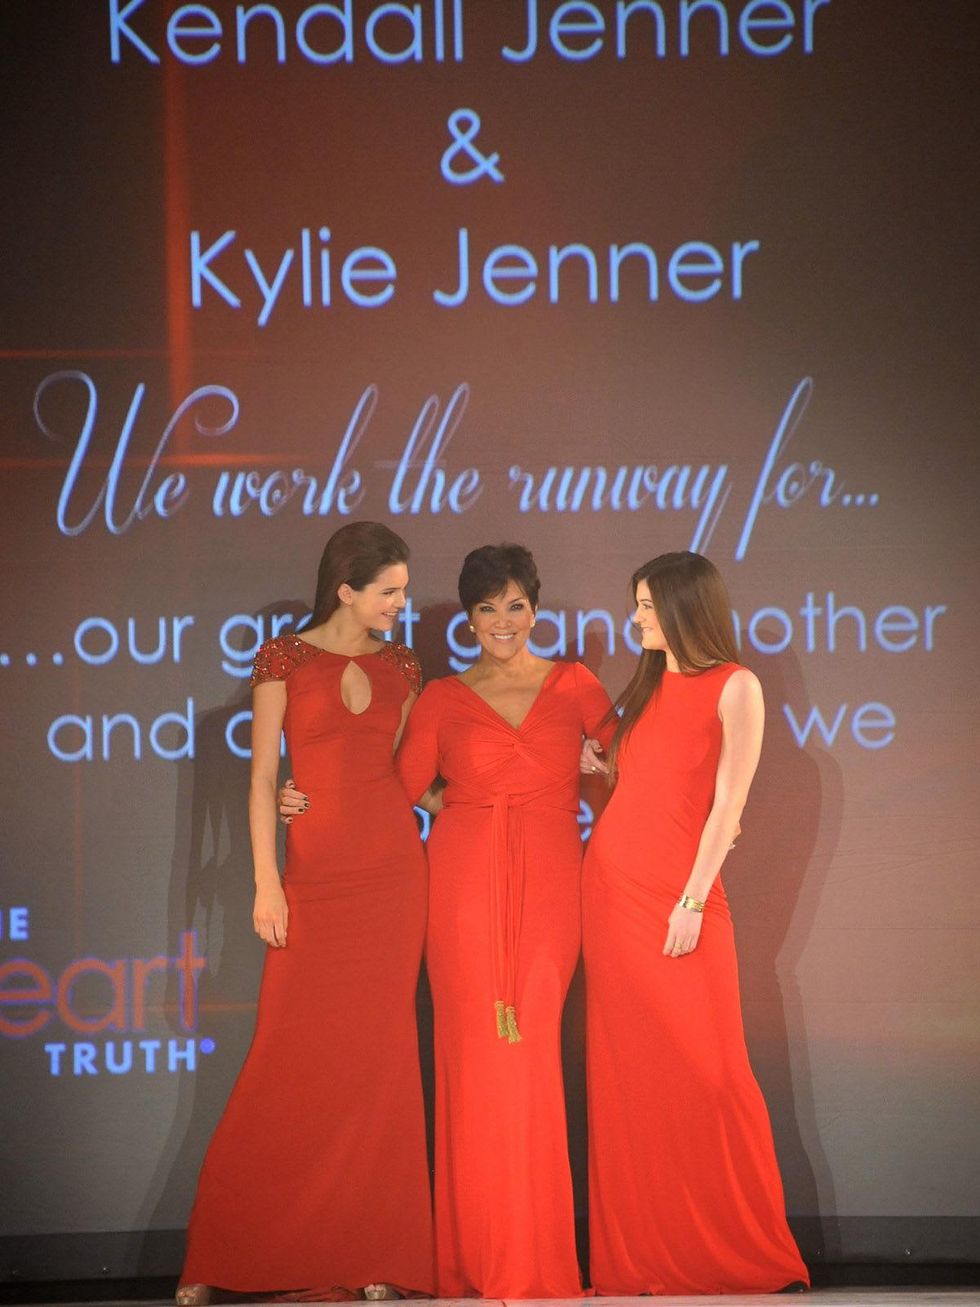 10, The Heart Truth 2013 Fashion Show, Kendall Jenner, Kris Jenner and Kylie Jenner wearing Badgley Mischka